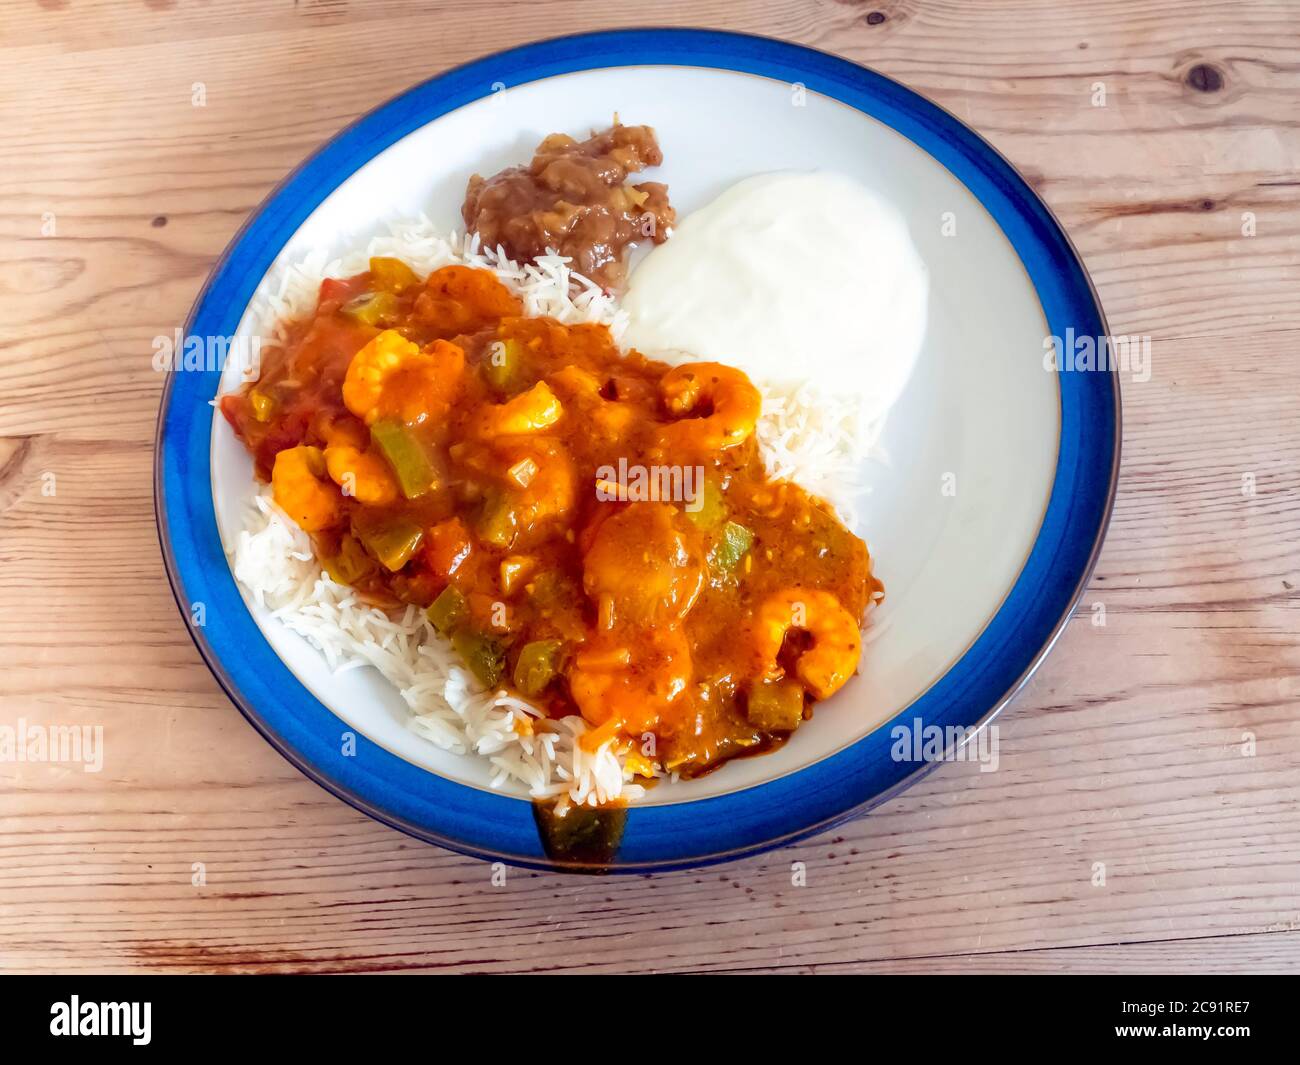 Indian style food prawn curry Jalfrezi on Basmati rice with yoghurt and mango chutney on a wooden table top Stock Photo